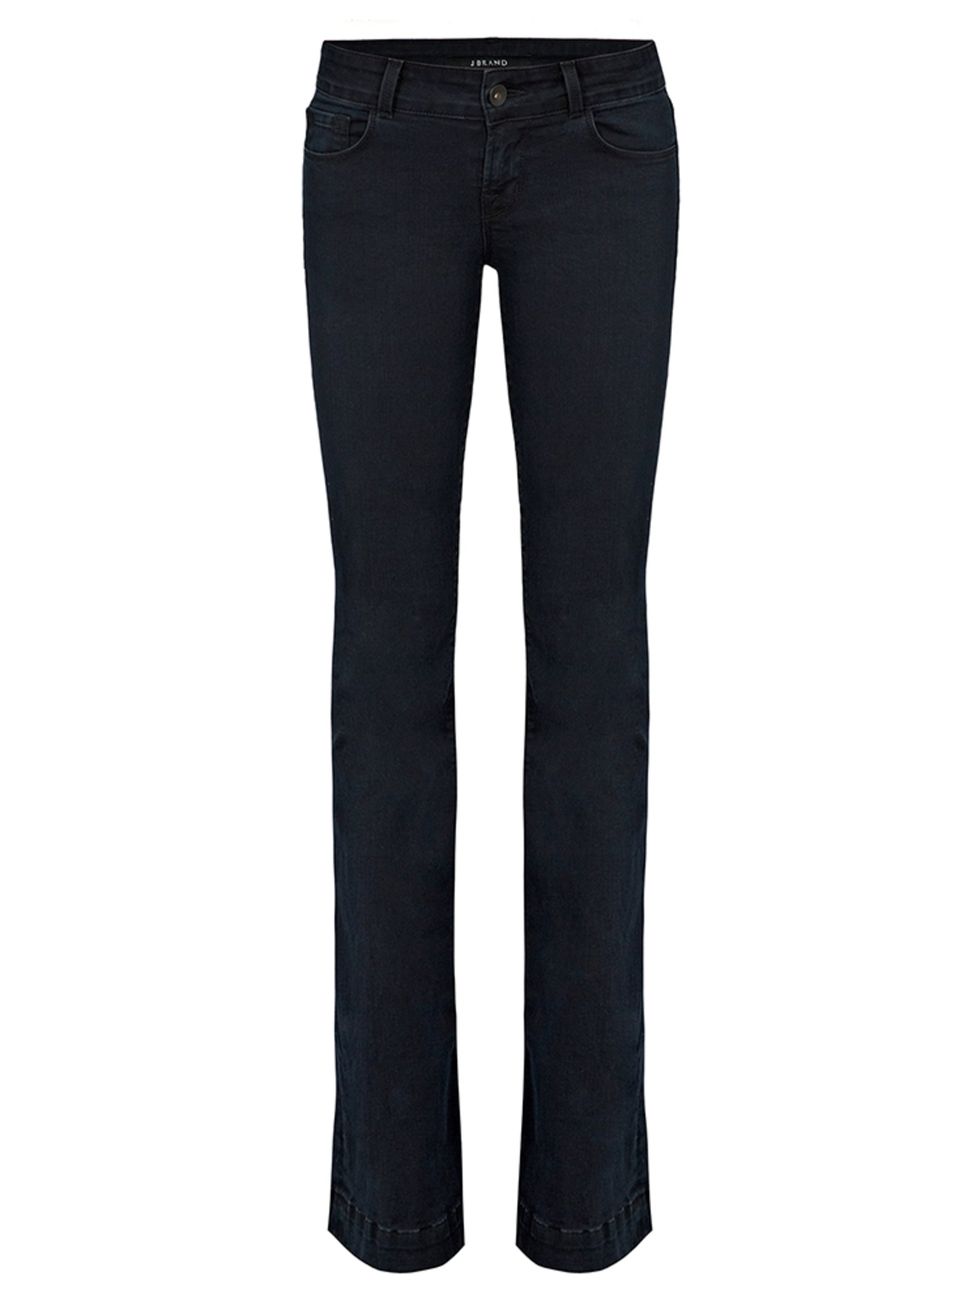 <p>J Brand Lovestory flares, £215 available exclusively at <a href="http://www.trilogystores.co.uk/j-brand/lovestory-flare-in-photoready-bluebird.aspx" target="_blank">trilogystores.co.uk</a></p>